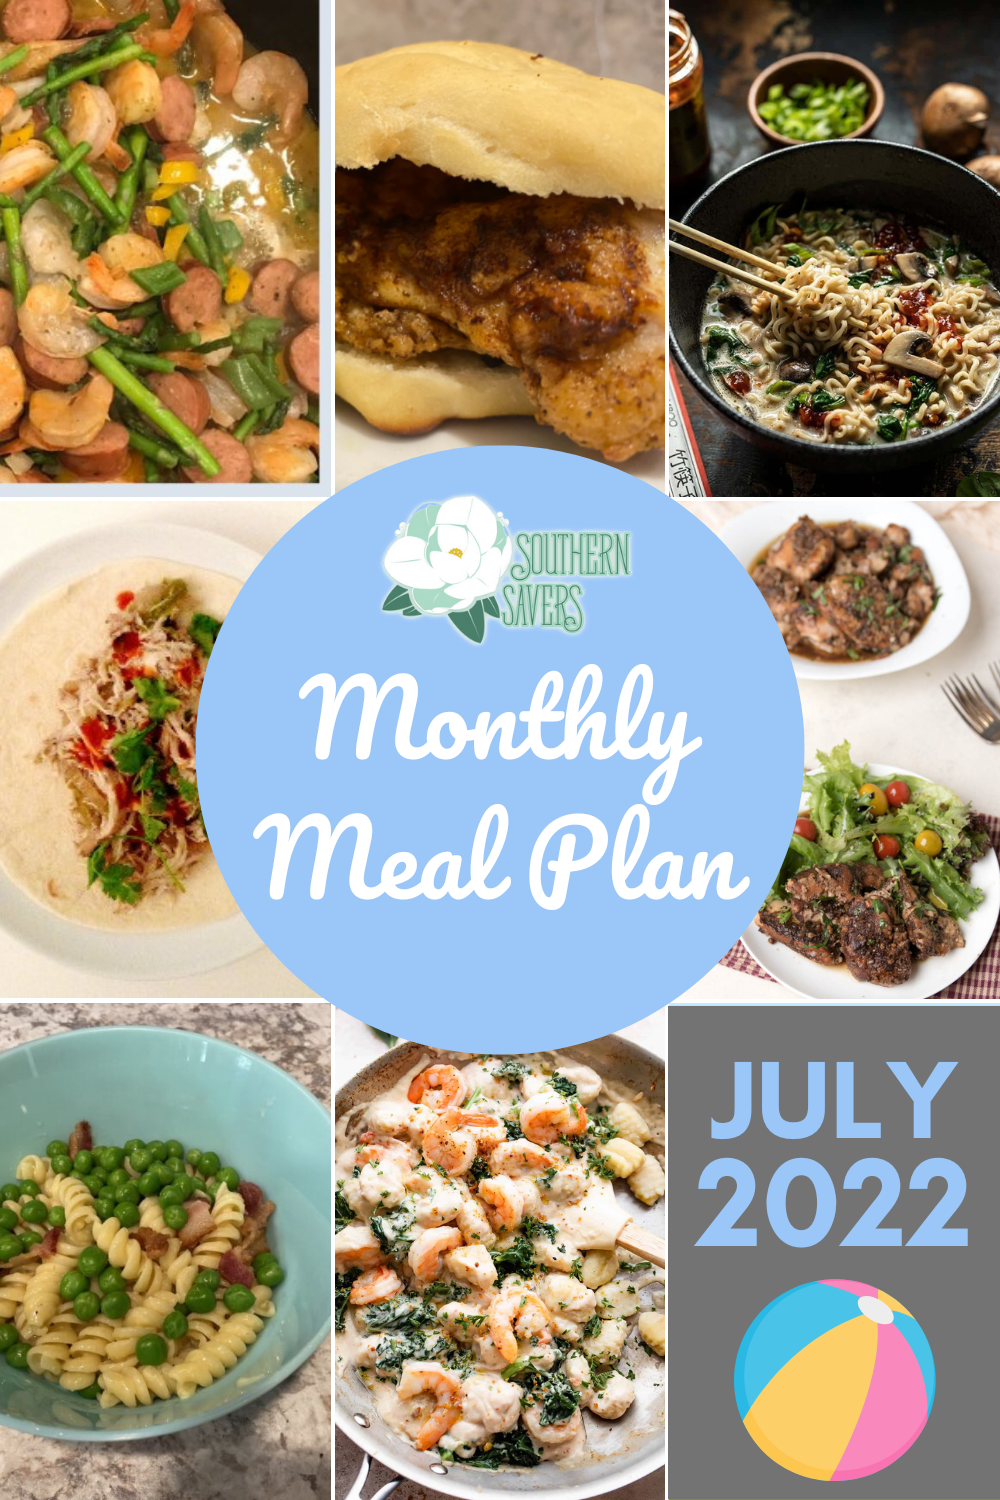 Take decision making off the table with our free July 2022 monthly meal plan, designed to make meal planning easier for you!